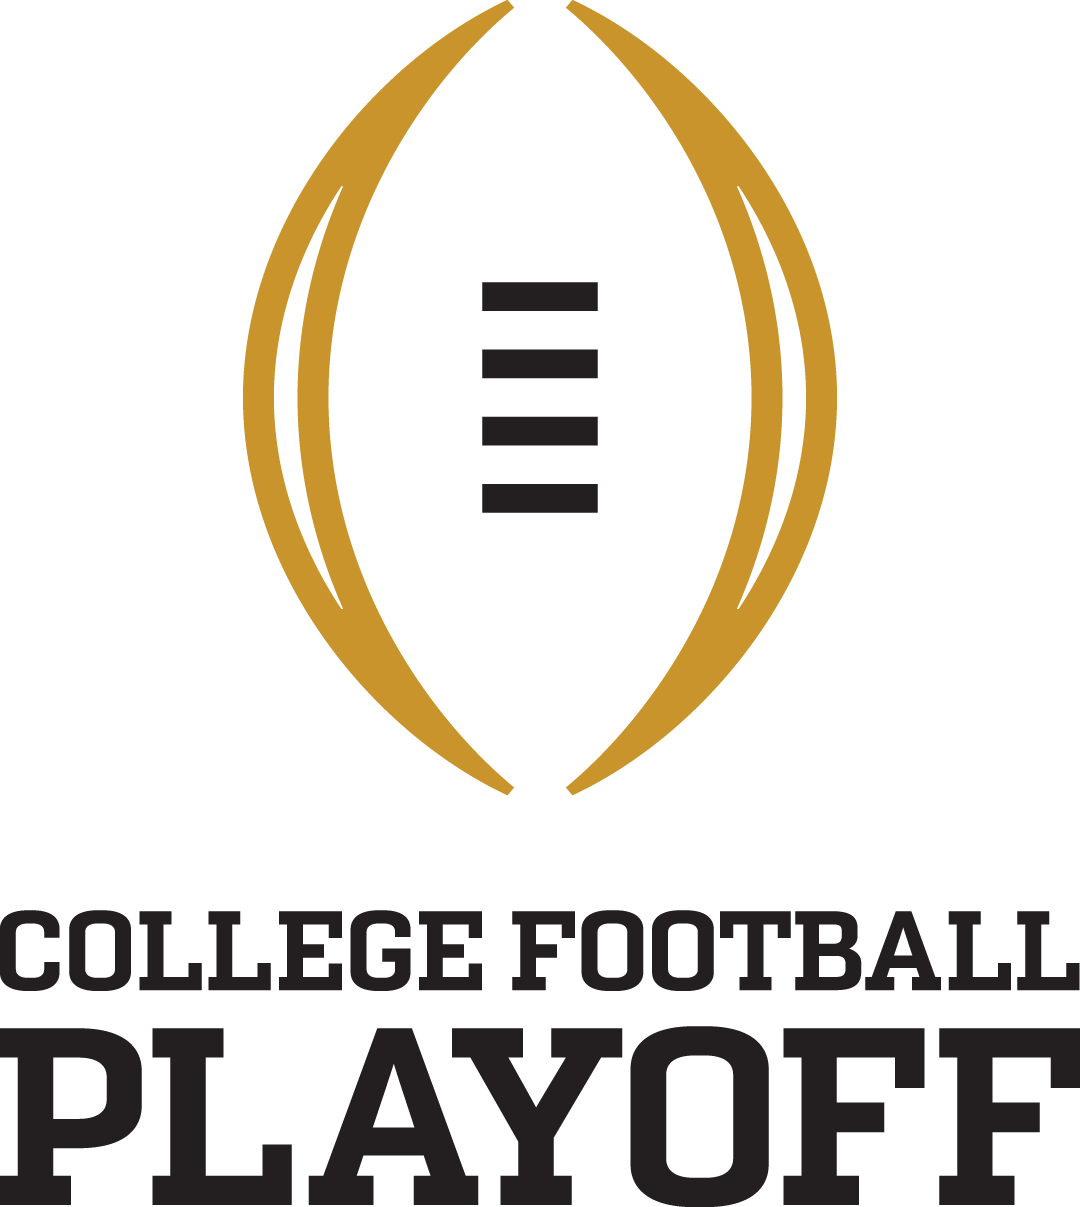 CFP Logo - Overview - College Football Playoff